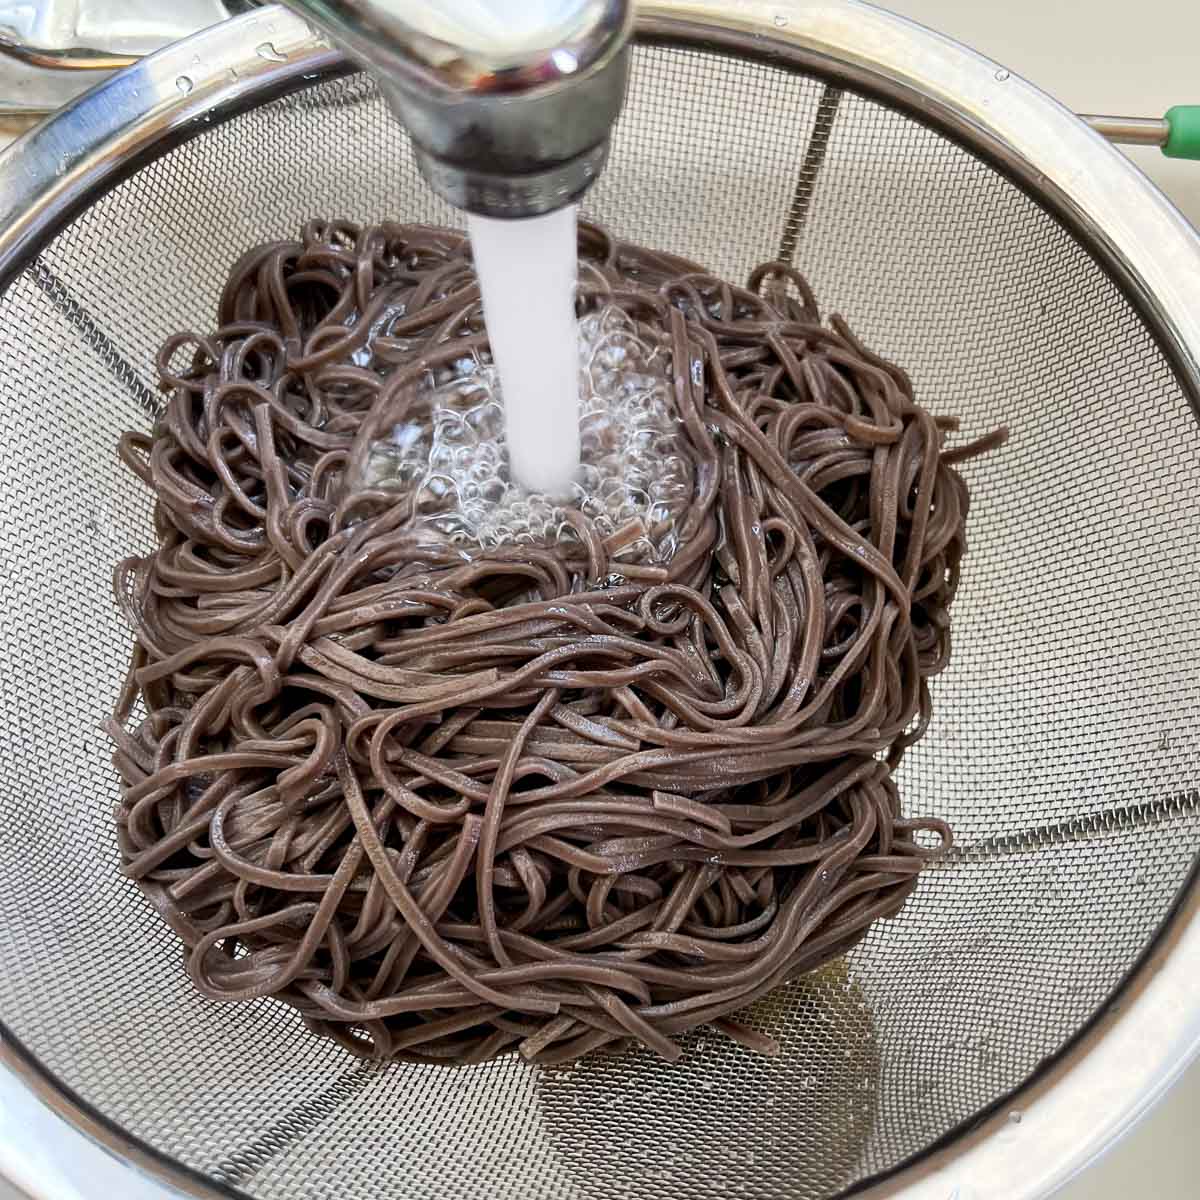 cold water running over the Japanese soba noodles